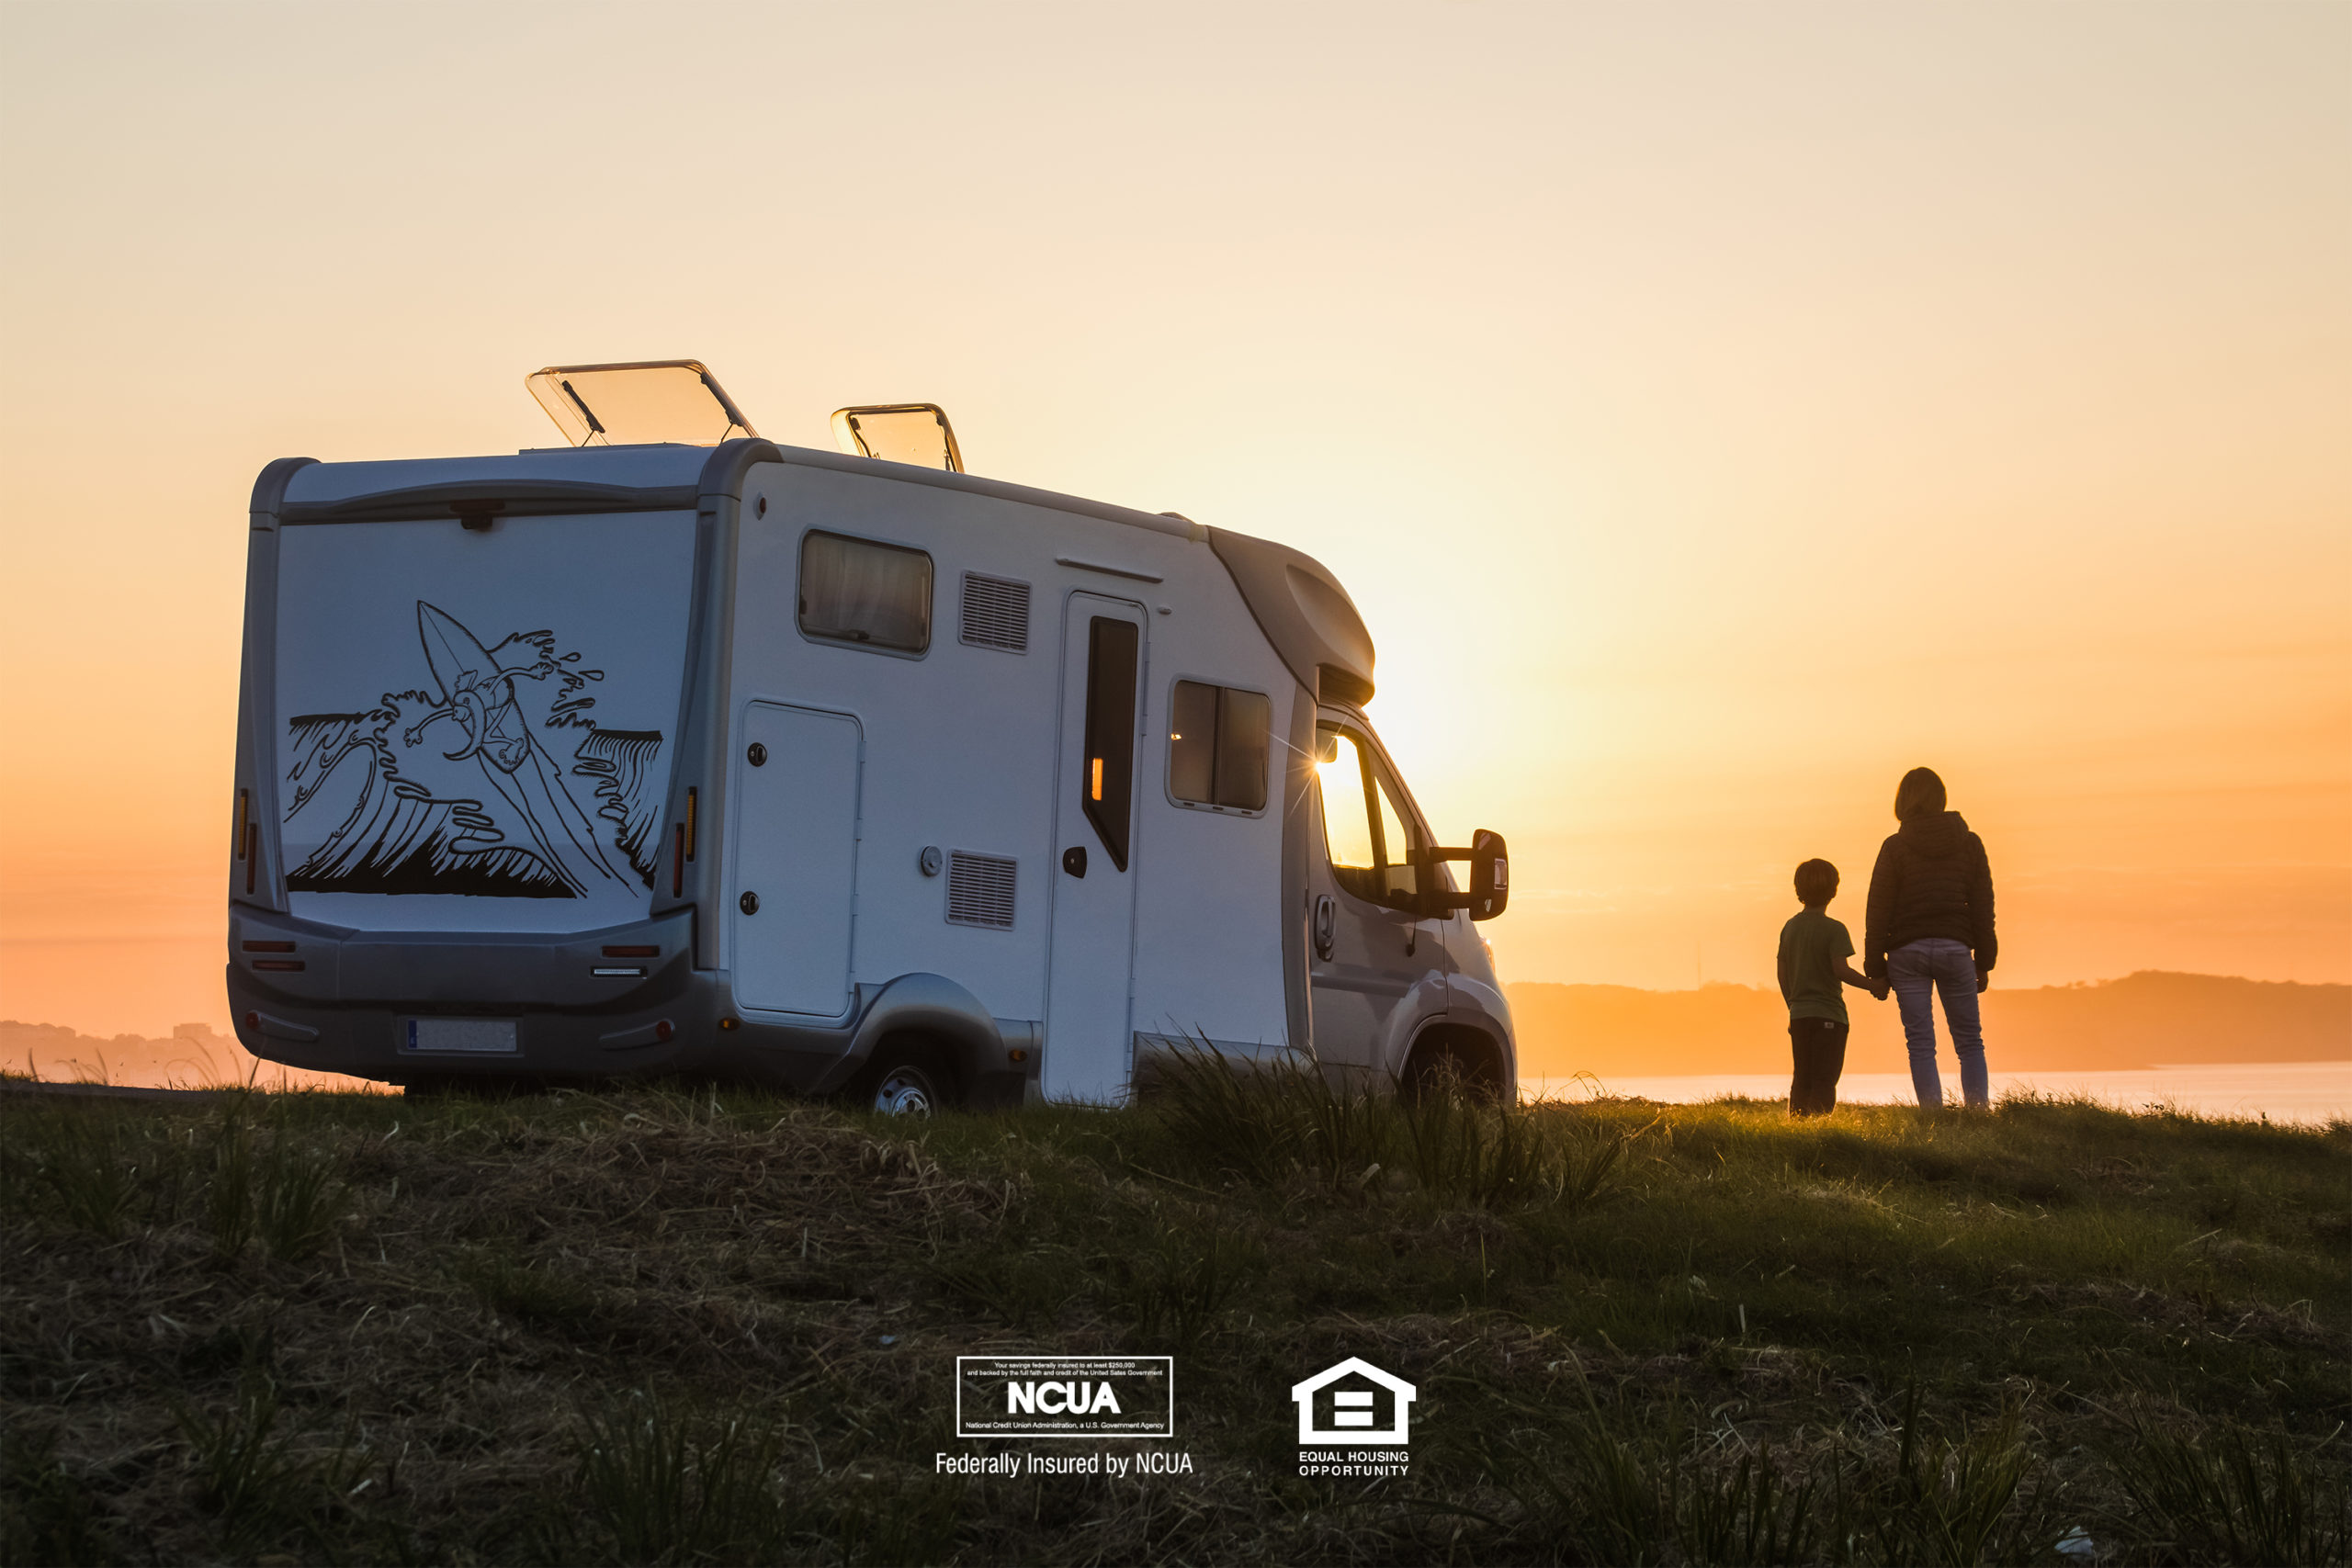 If you are looking for consumer loans in Georgia, we may be able to offer options for personal loans, recreational vehicle loans, boat loans, and more. In this image, a parent and child watch a sunset with an RV parked beside them.